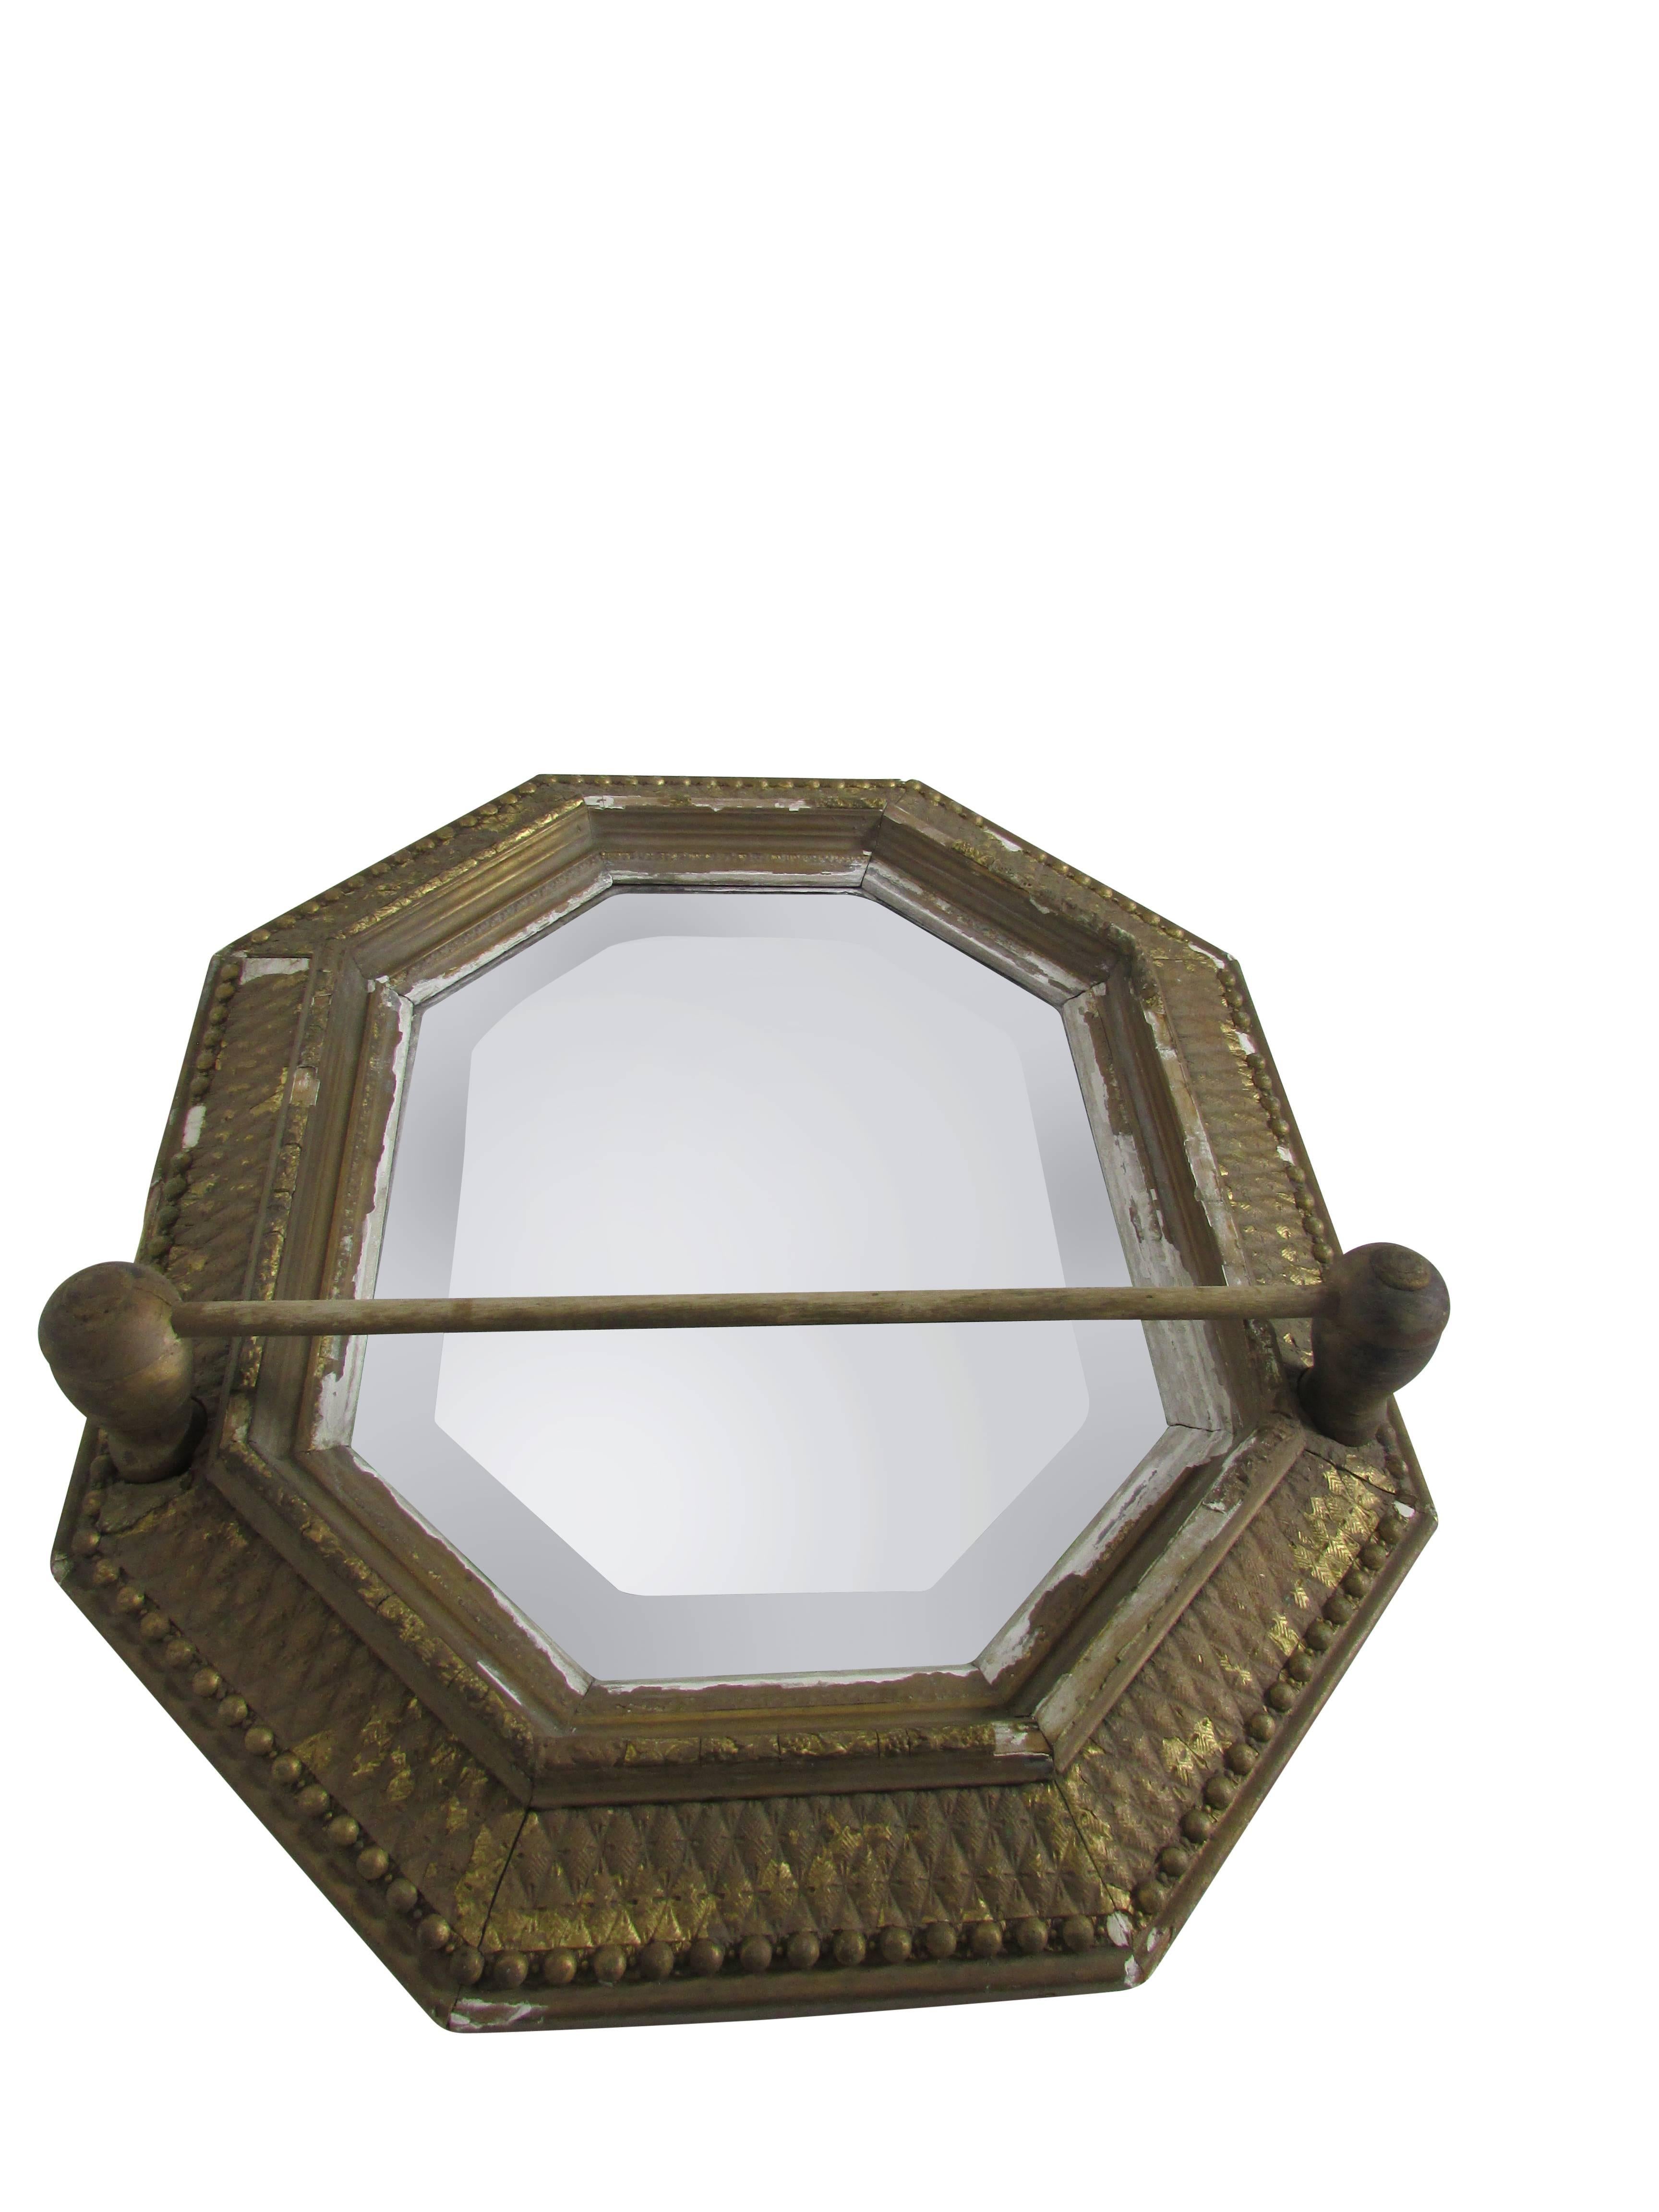 Unknown Early Gilt Octagonal Mirror with Towel Bar